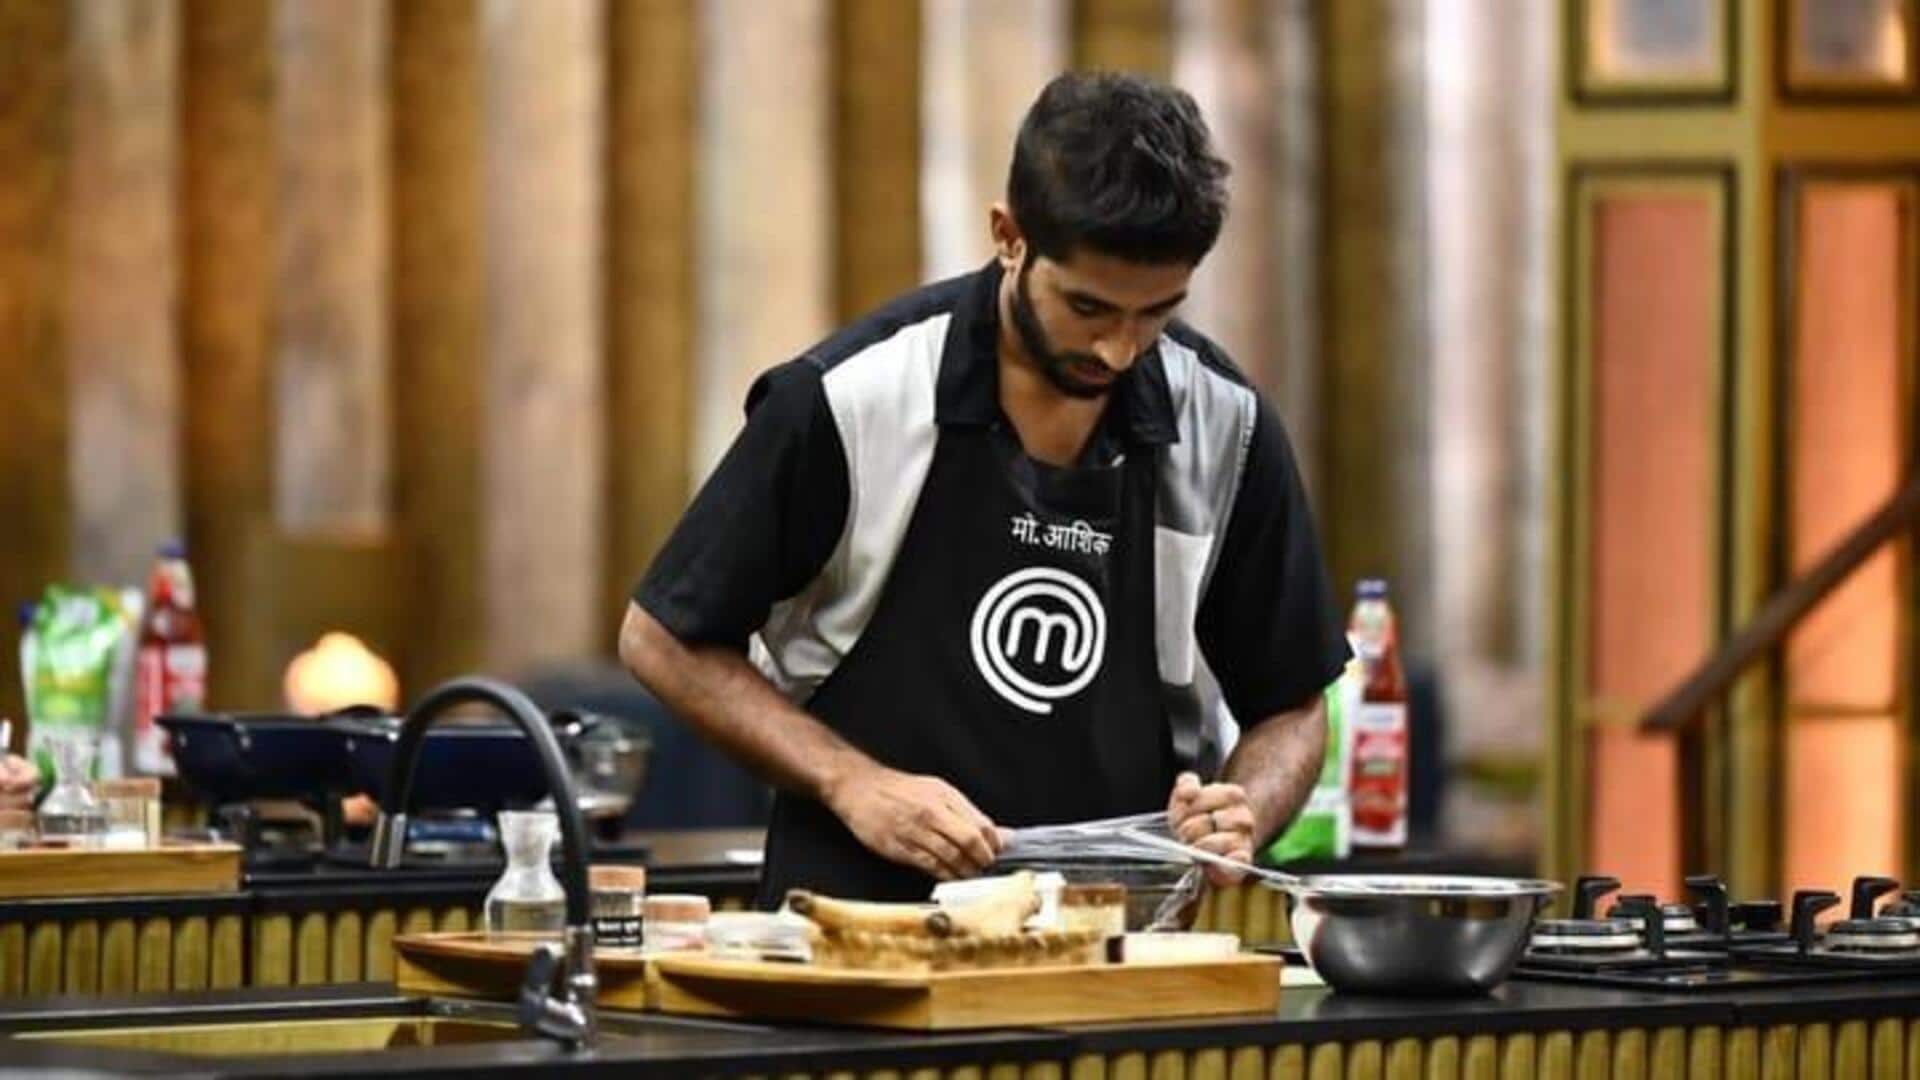 Mohammed Aashiq becomes the winner of 'MasterChef India 8'